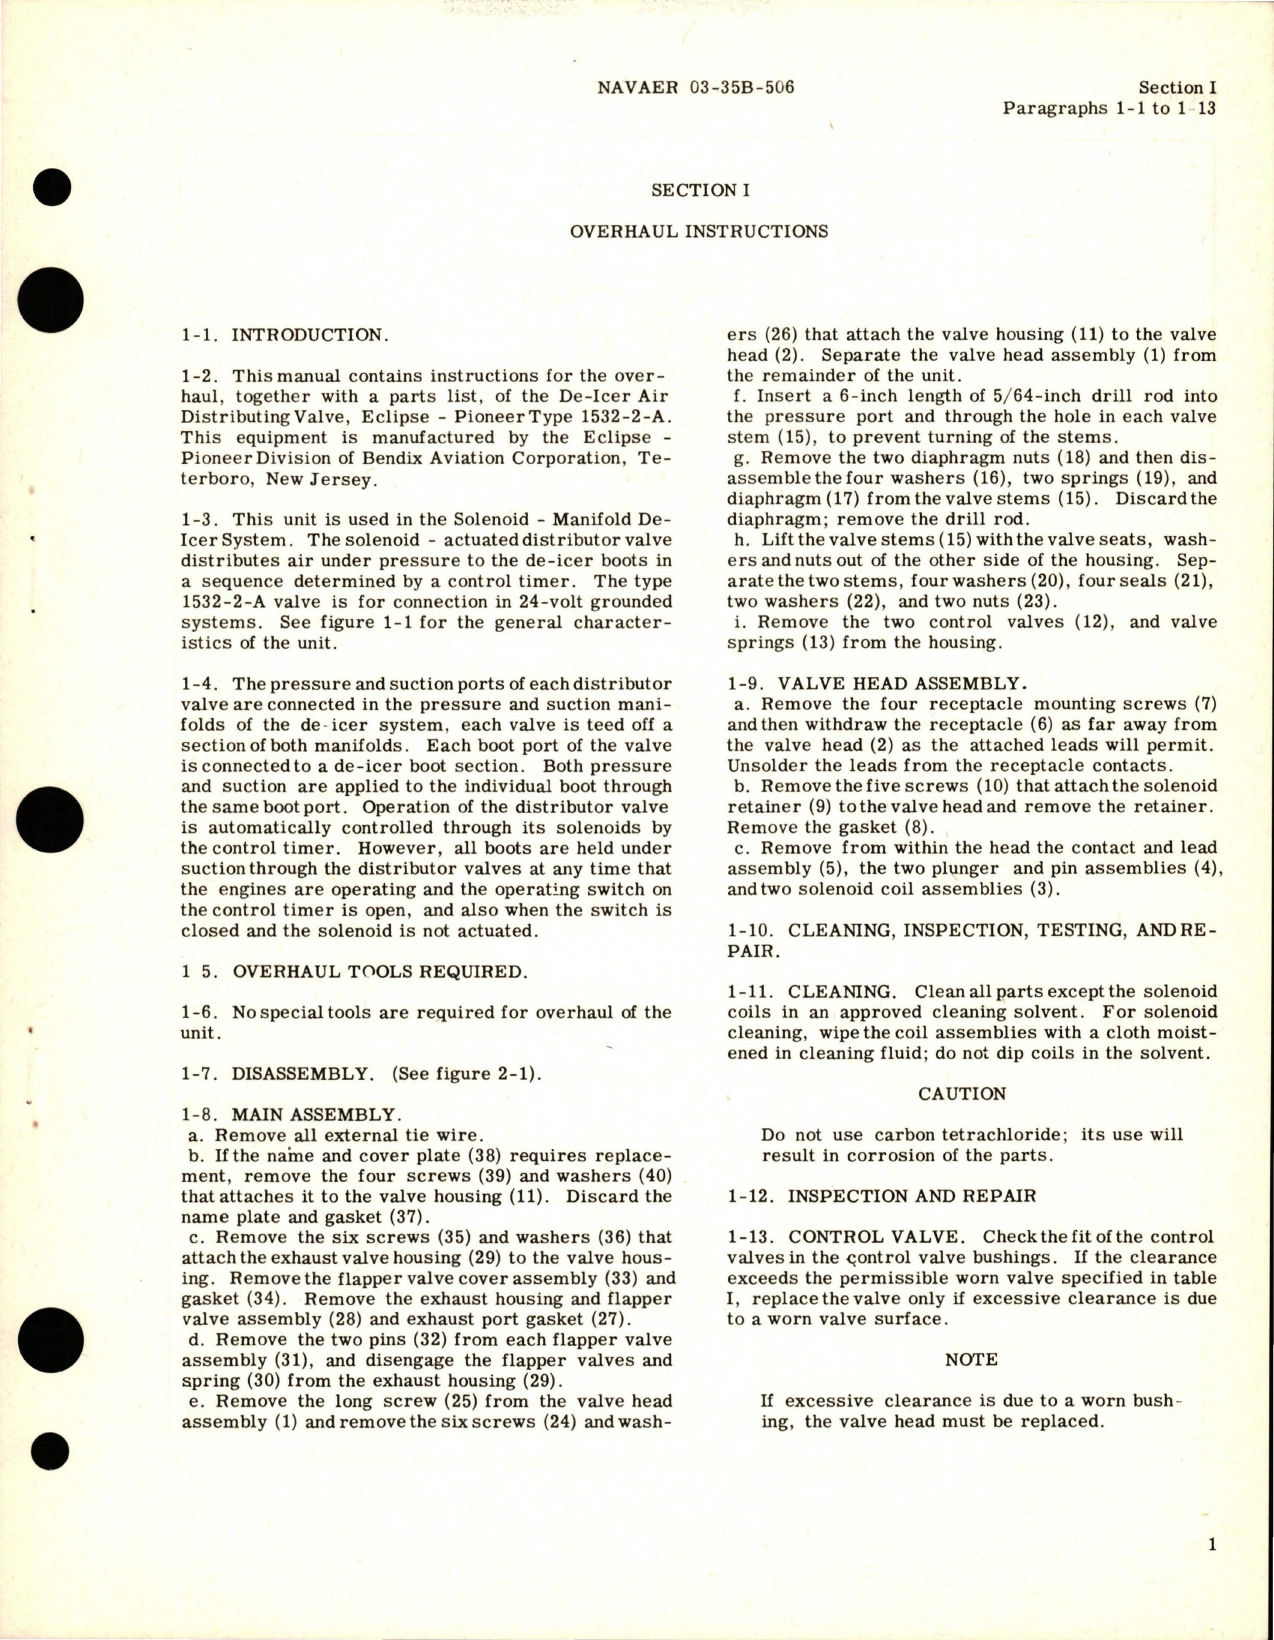 Sample page 5 from AirCorps Library document: Overhaul Instructions with Parts Catalog for De-Icer Air Distributing Valve - Part 1532-2-A 